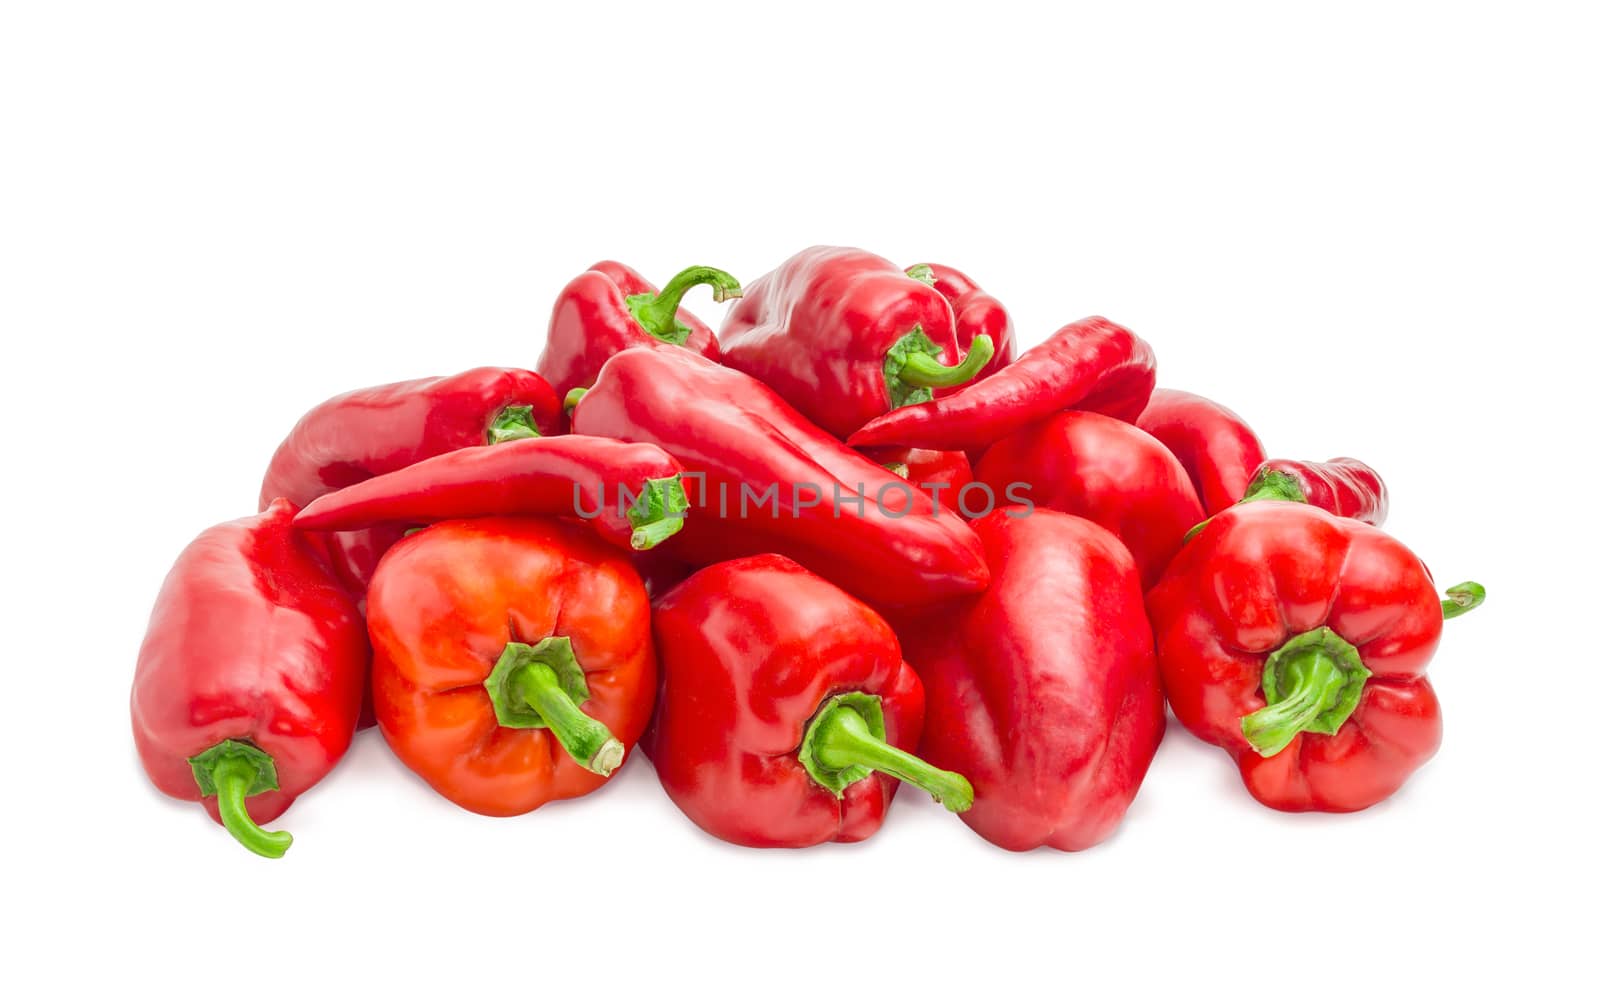 Pile of the freshly harvested different red bell peppers and red chili on a white background
